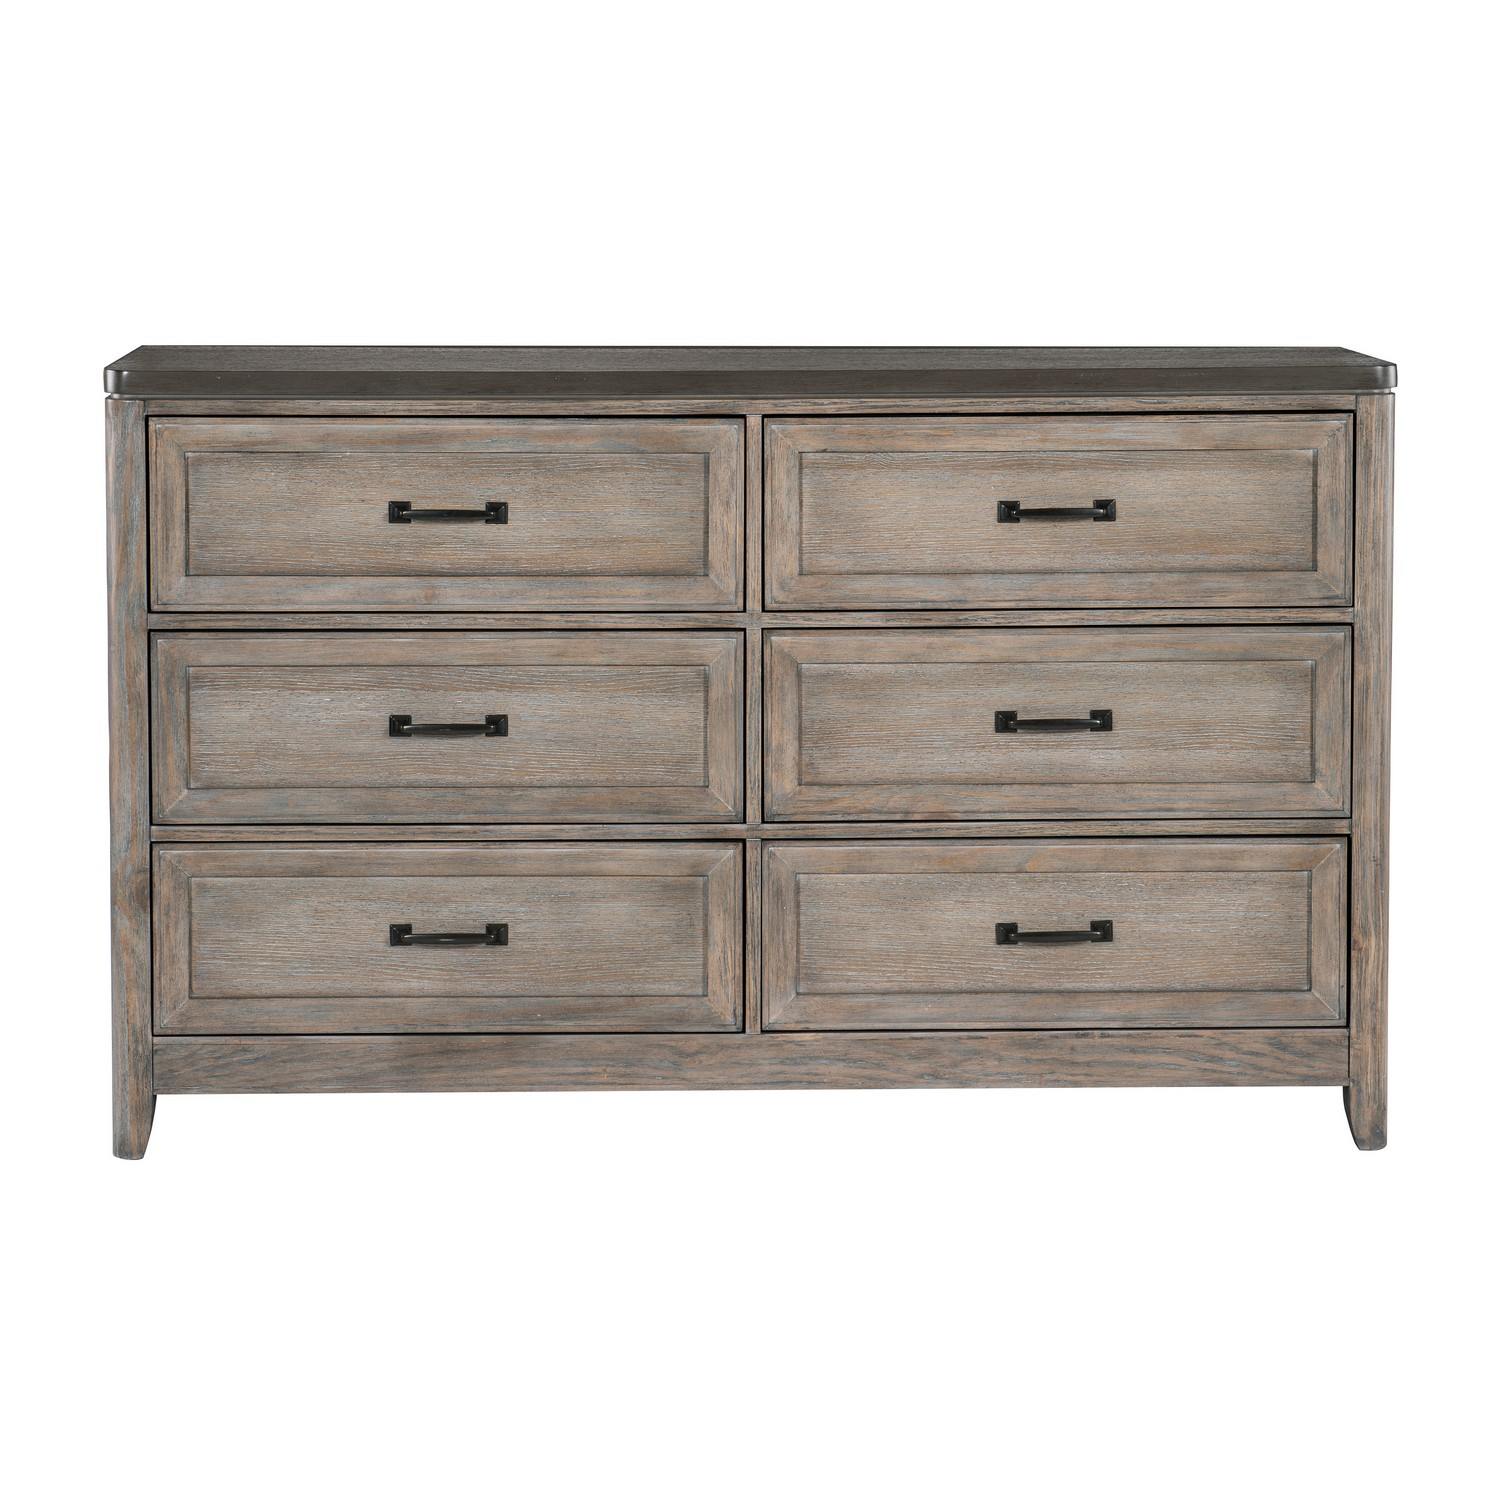 Homelegance Newell Dresser - Two-tone finish: Brown and Gray